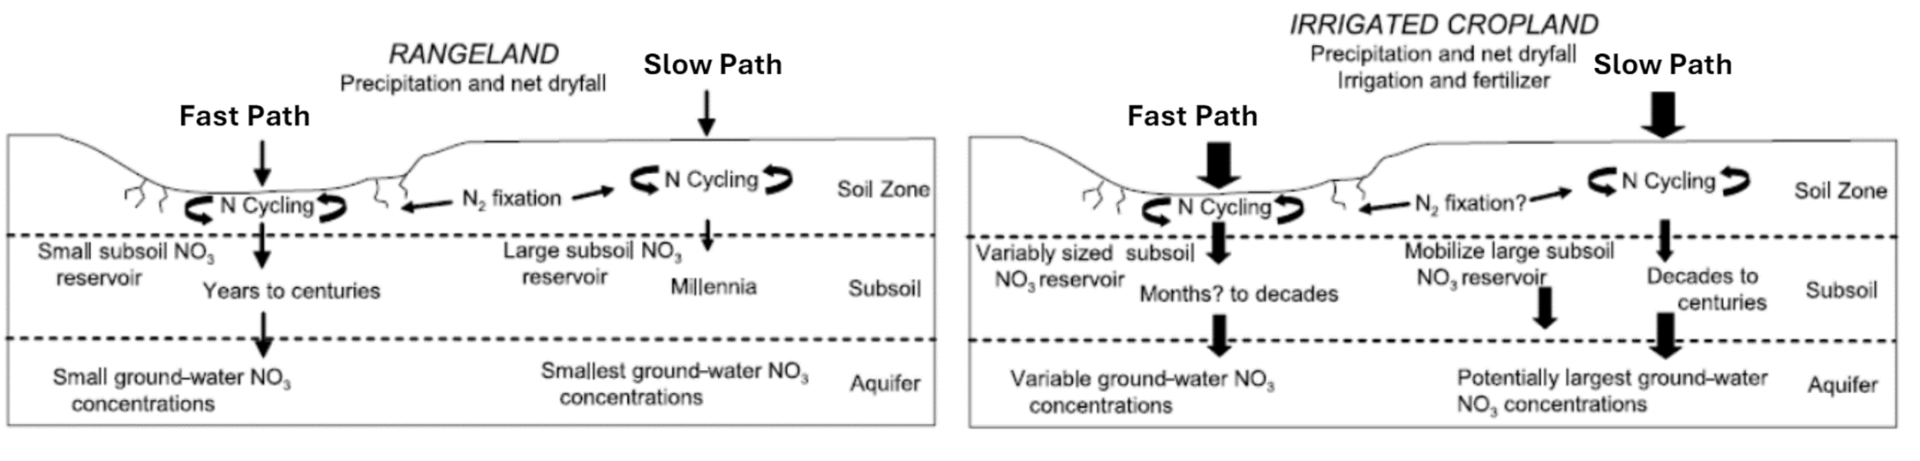 Rangeland and Cropland nitrate flow paths. Fast or Slow depending on soil.